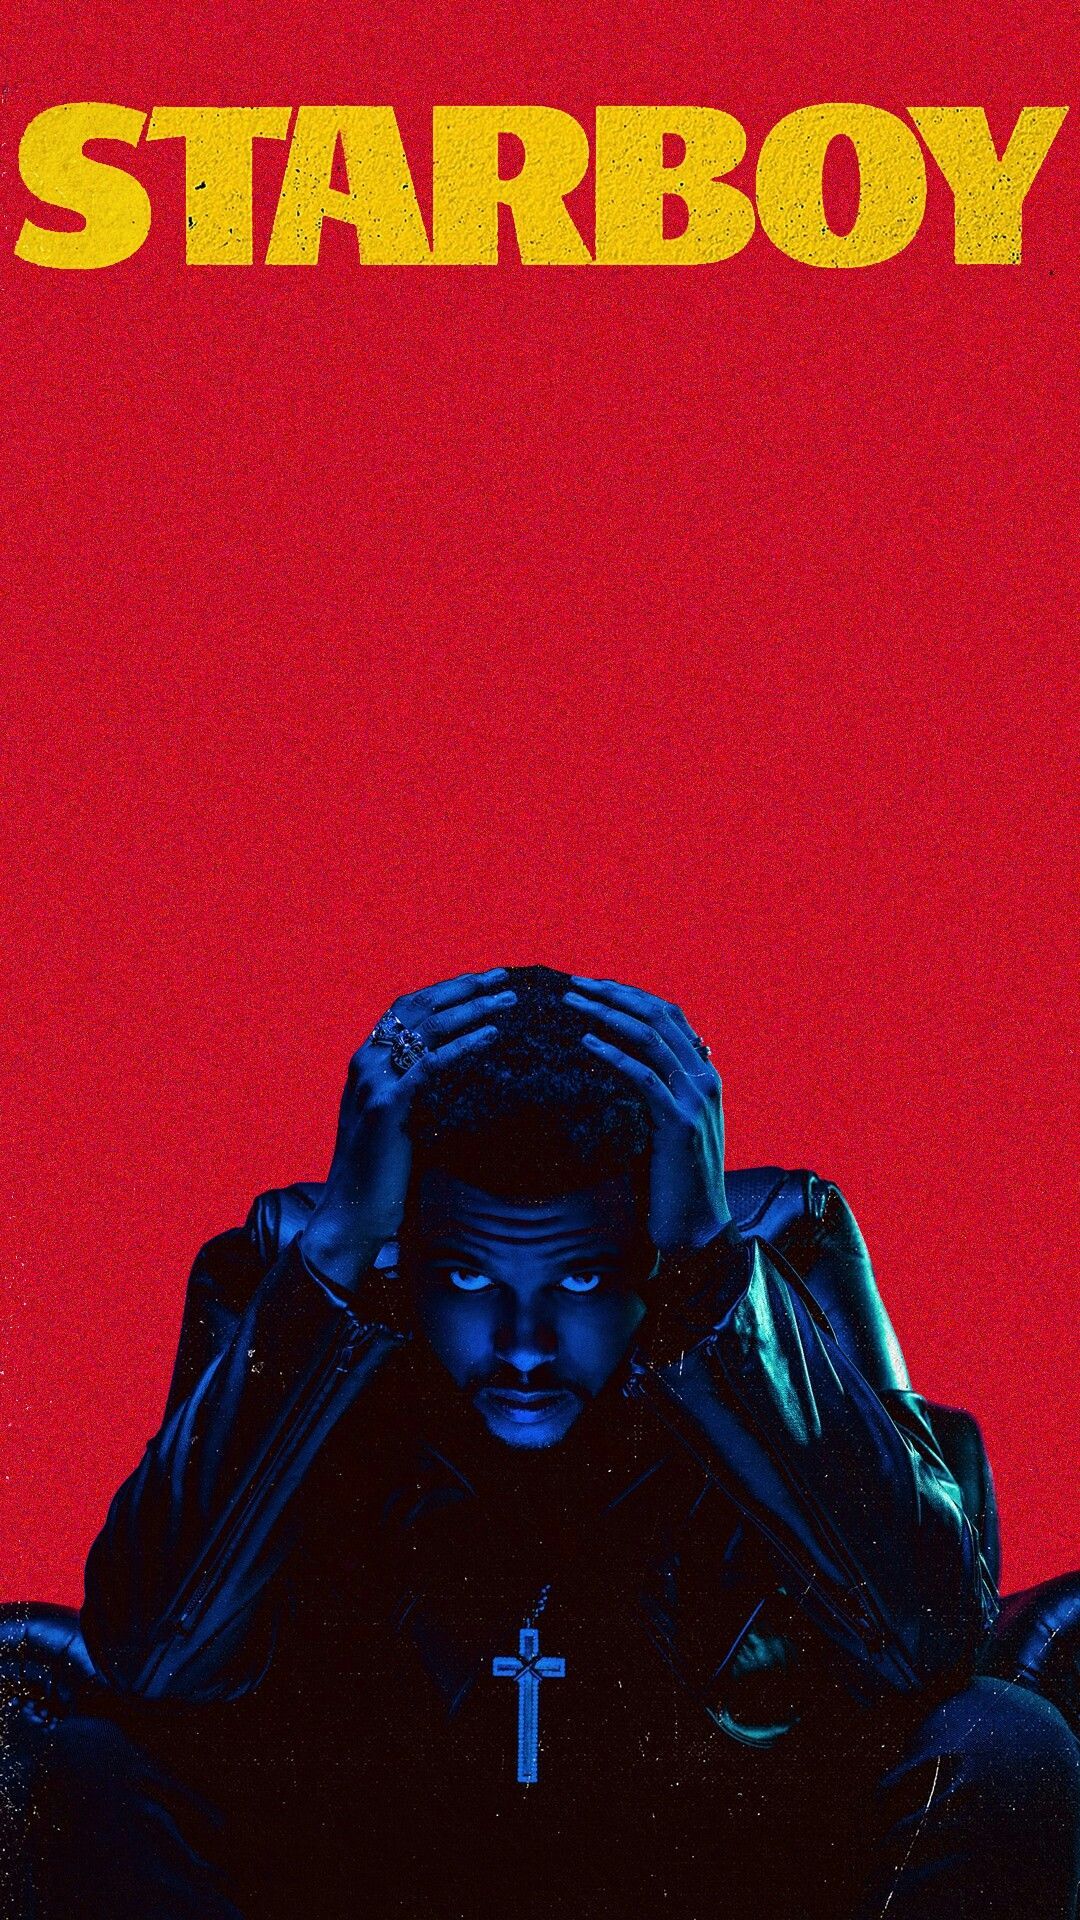 The Weeknd Starboy Wallpapers Wallpaper Cave Starboy music updated their cover photo. the weeknd starboy wallpapers